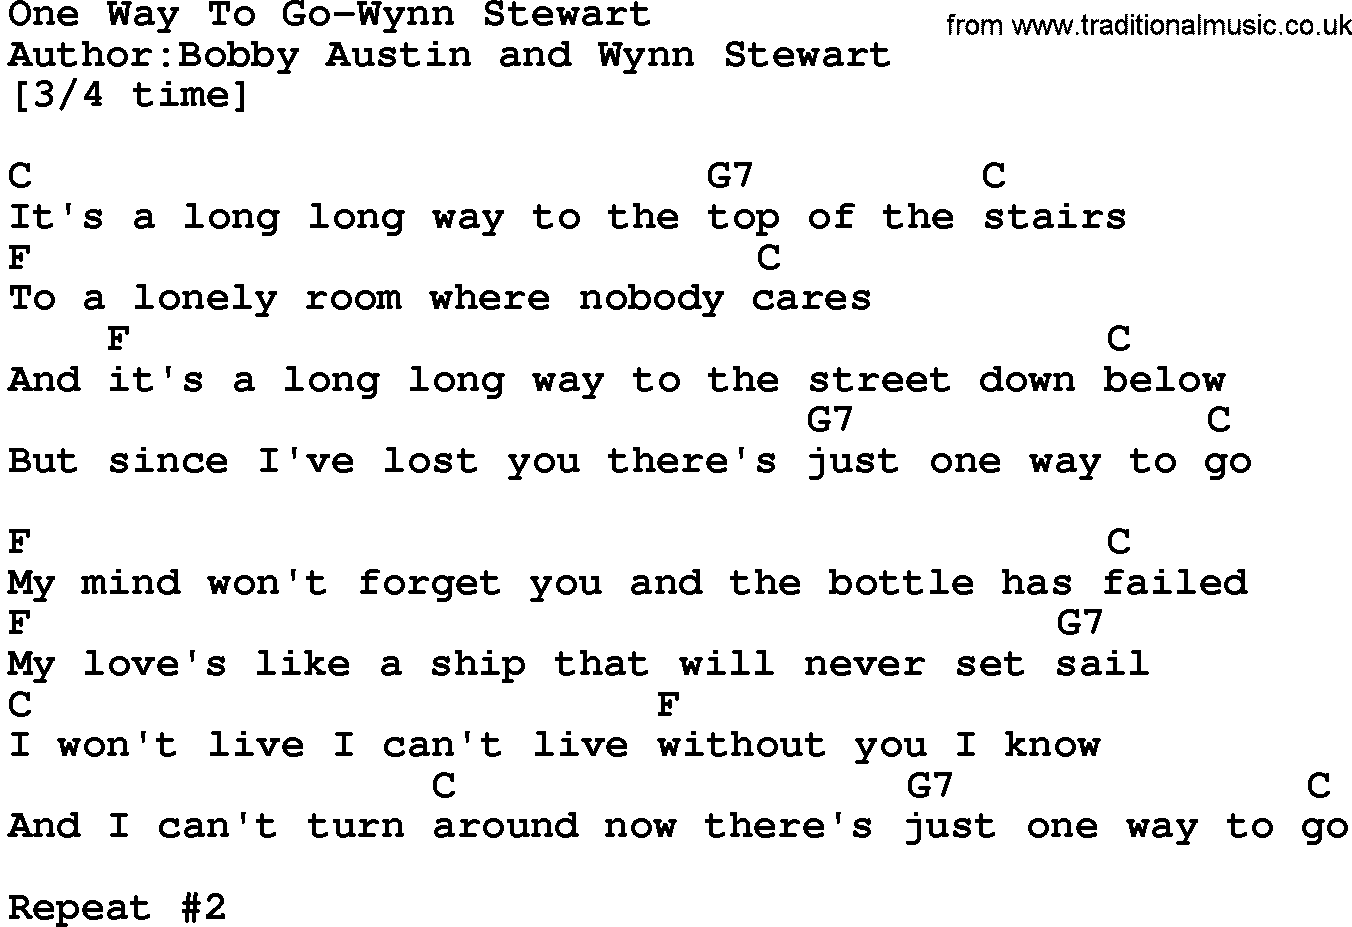 Country music song: One Way To Go-Wynn Stewart lyrics and chords